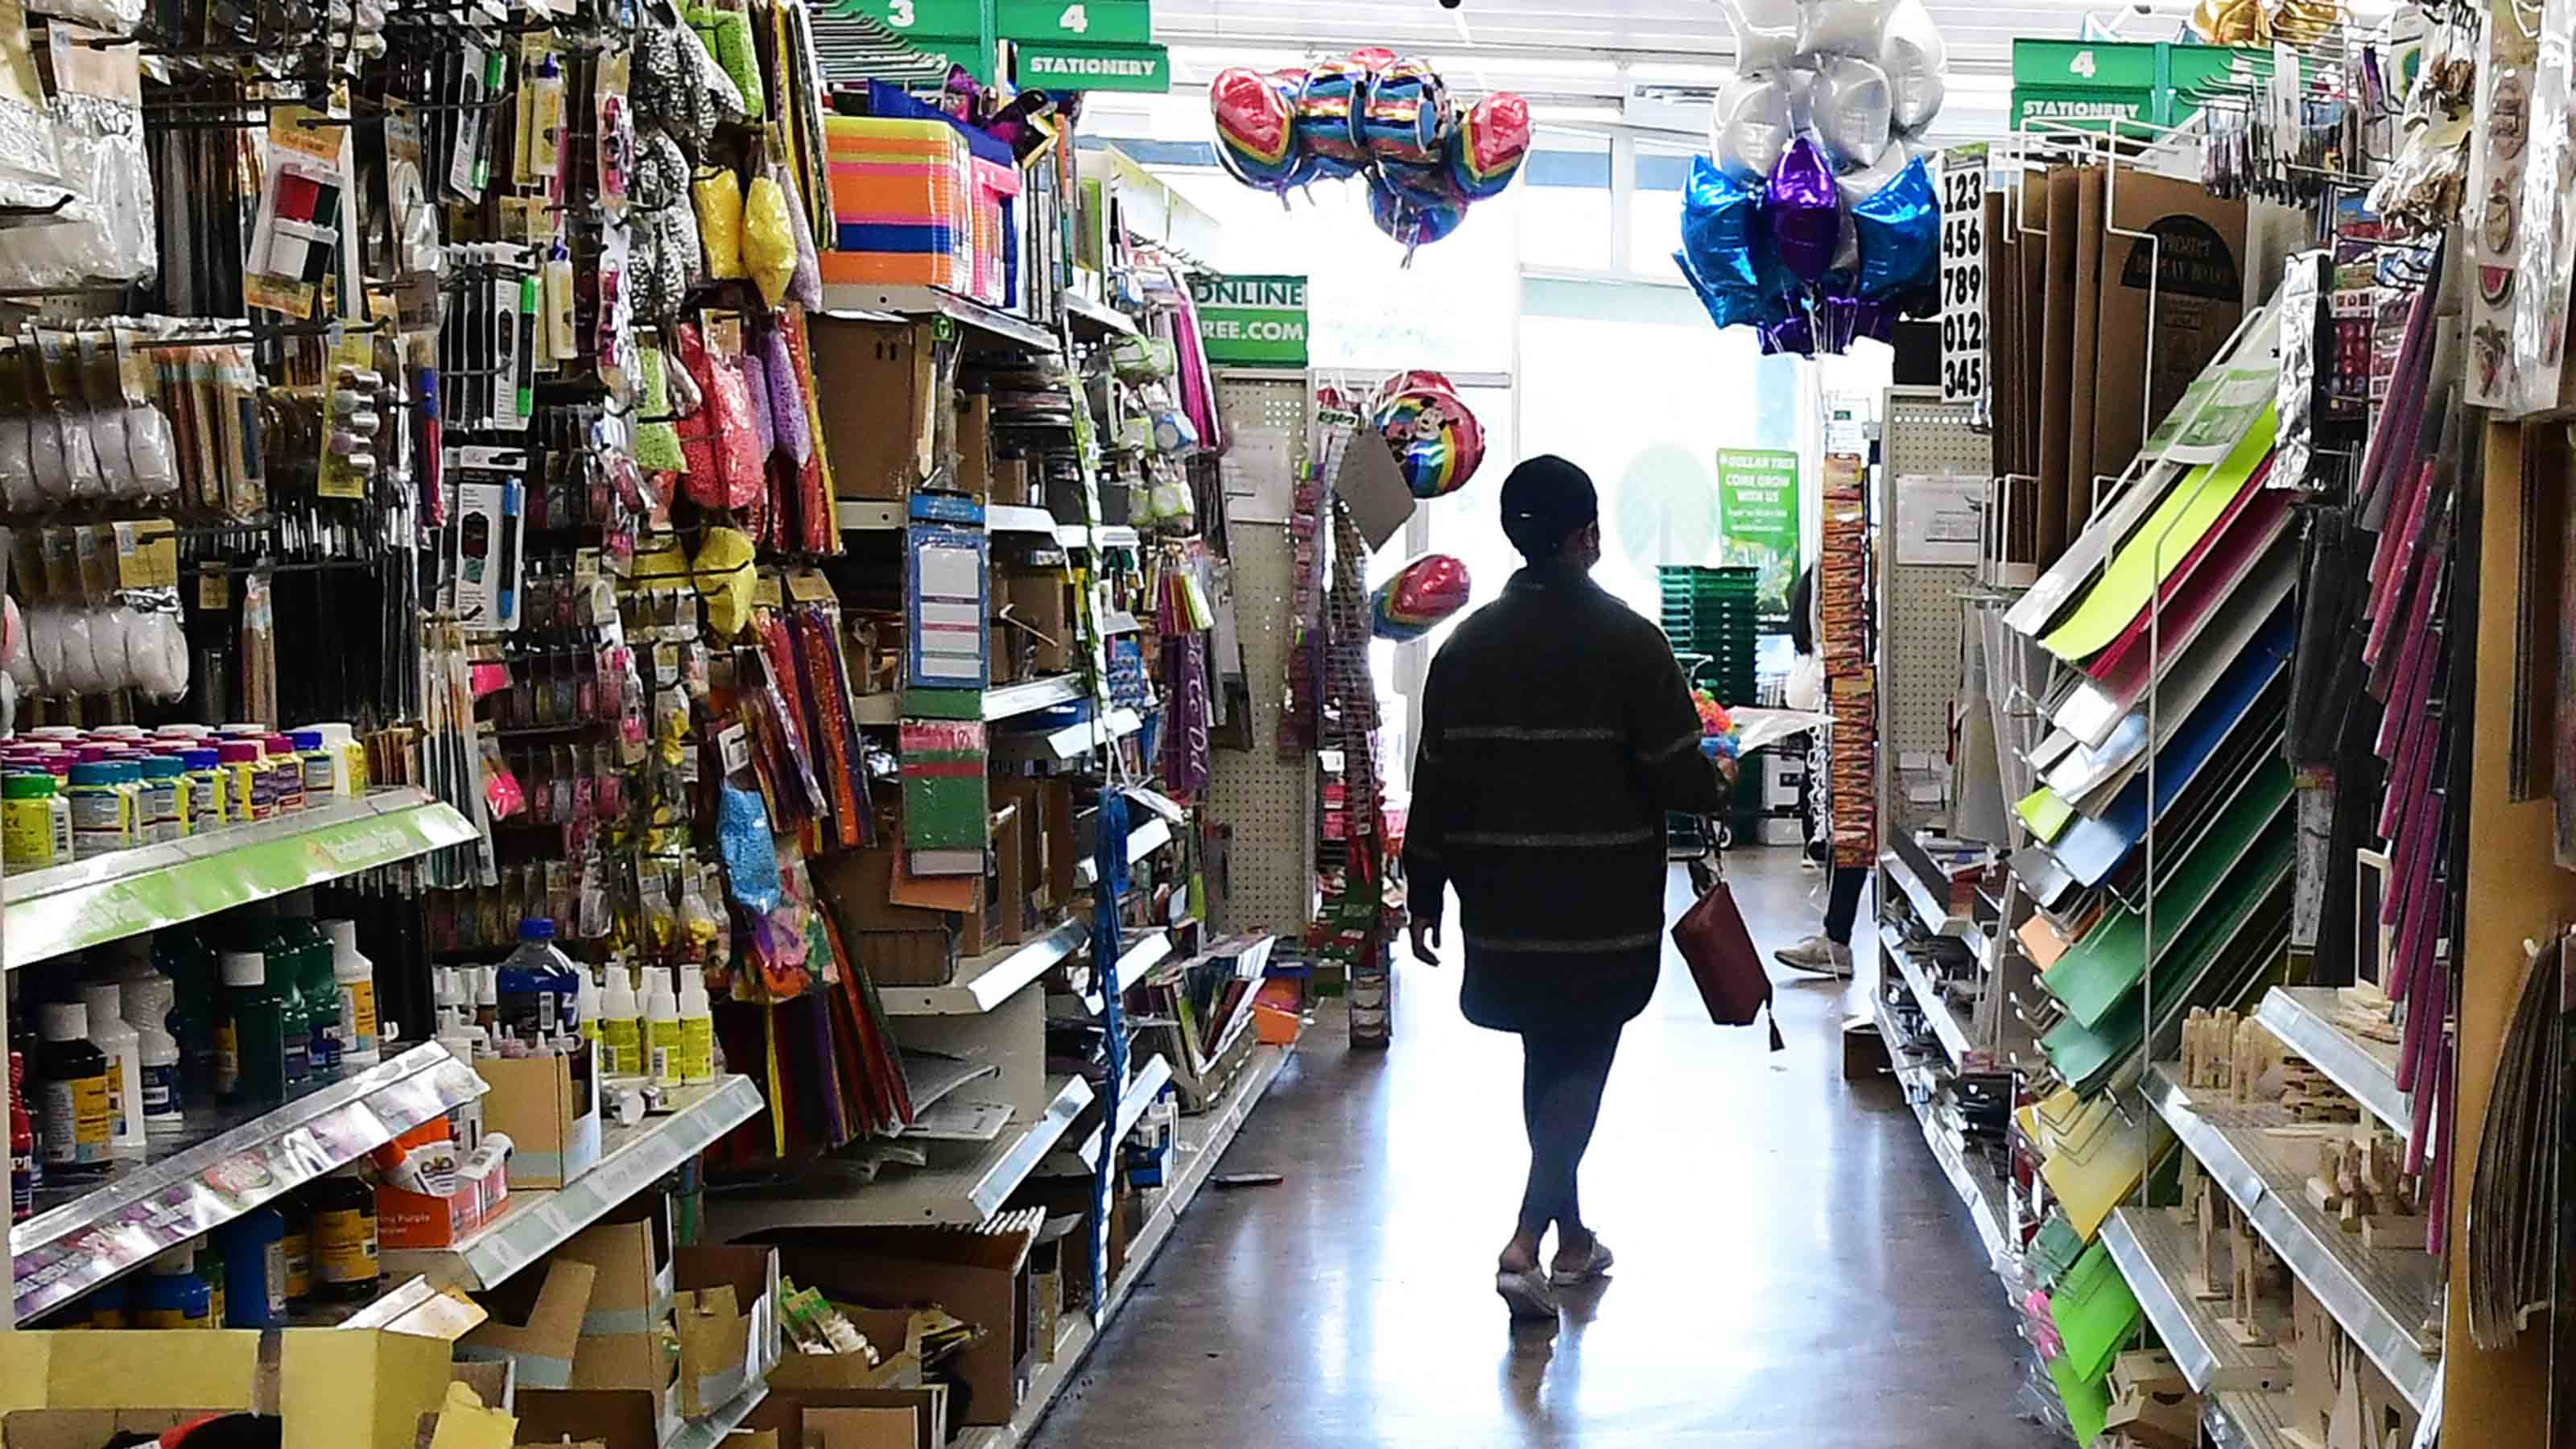 20 Things You Can Buy At The Dollar Store To Save Money in 2023